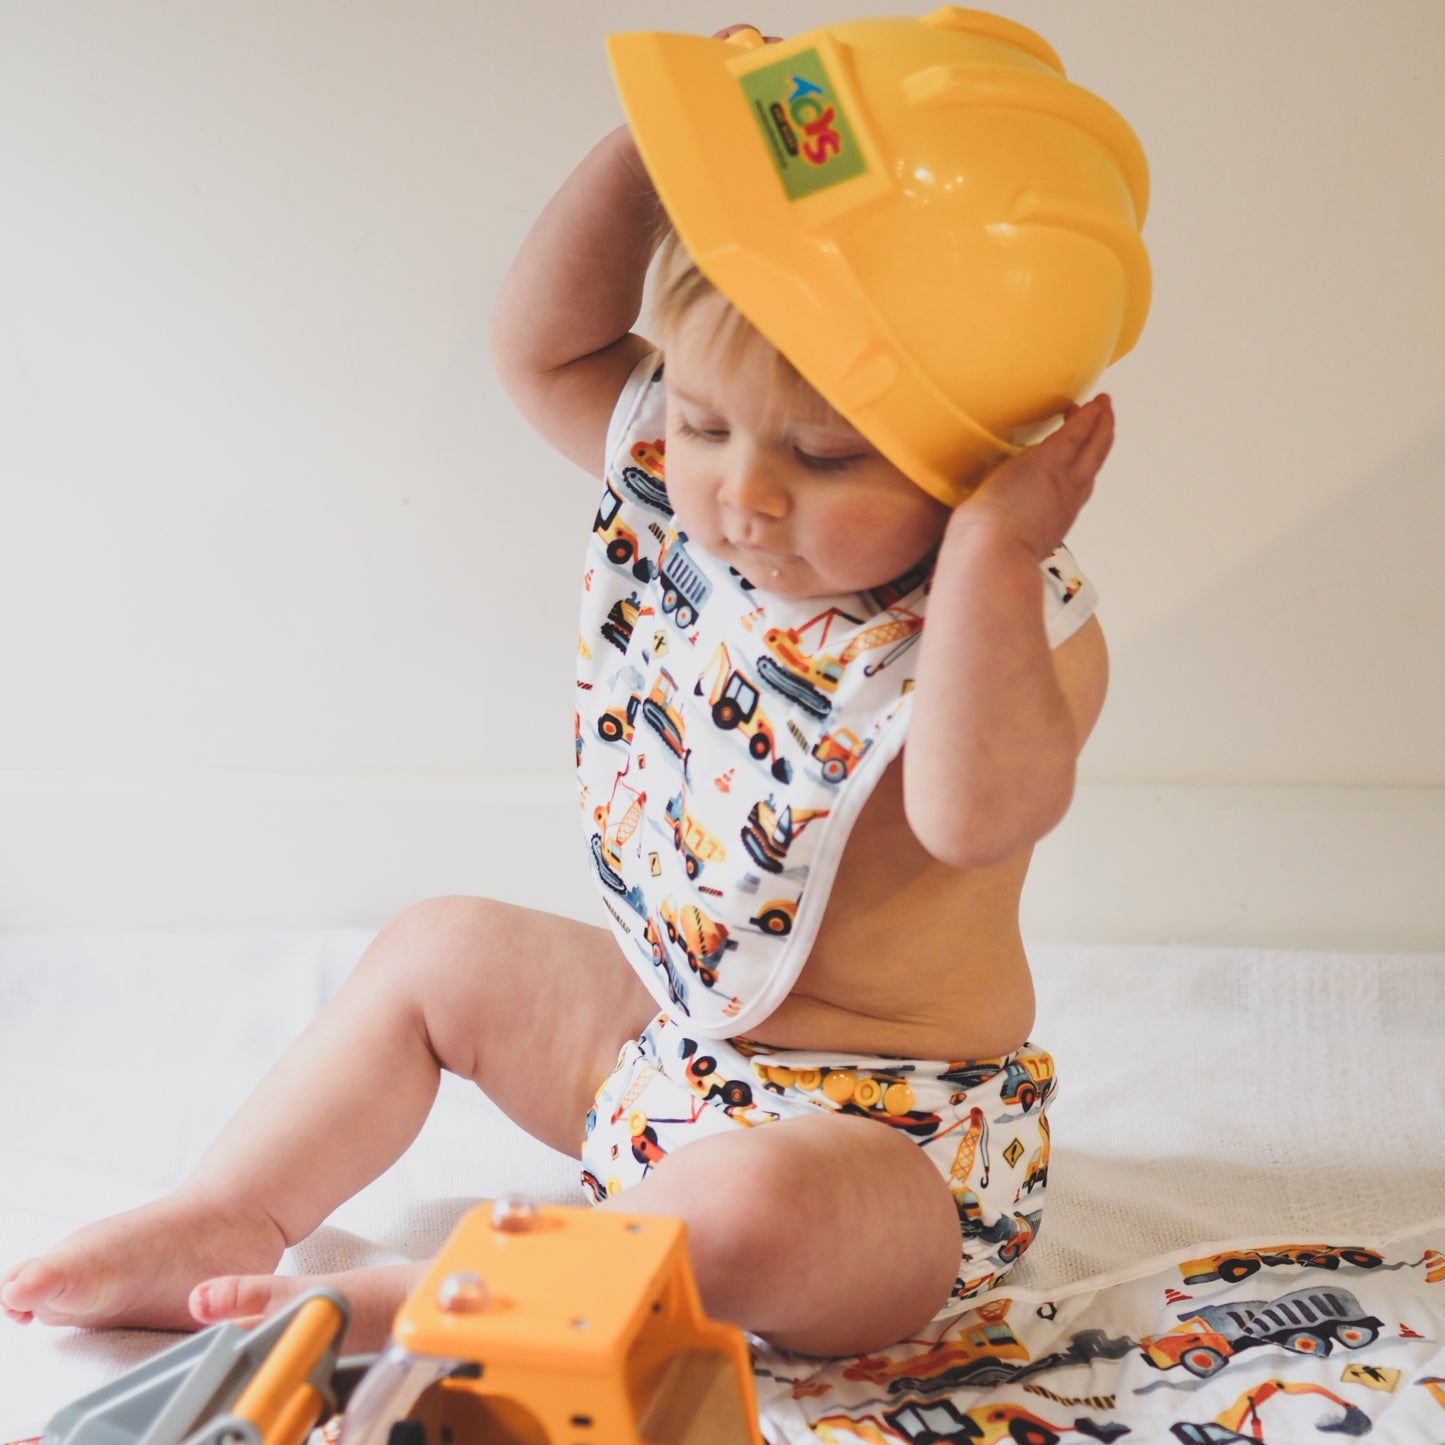 Baby wearing a yellow helmet and a diggers bib sitting on a diggers playmat